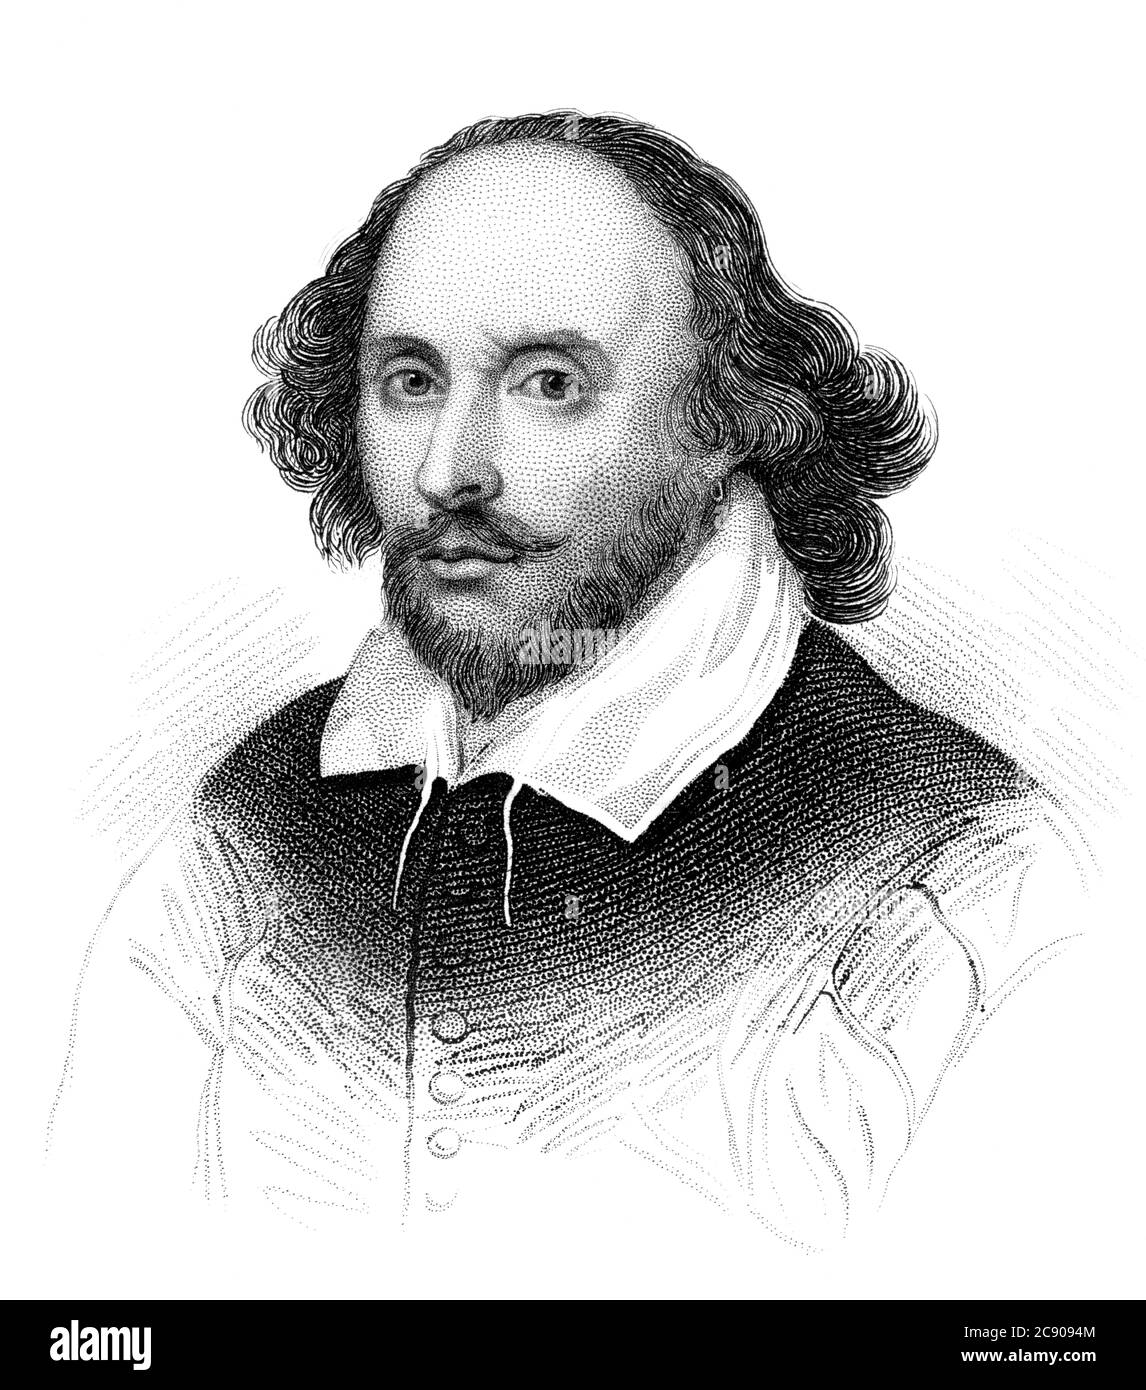 An engraved vintage illustration portrait of the Elizabethan playwright William Shakespeare of Stratford Upon Avon, from a Victorian book dated 1847 t Stock Photo